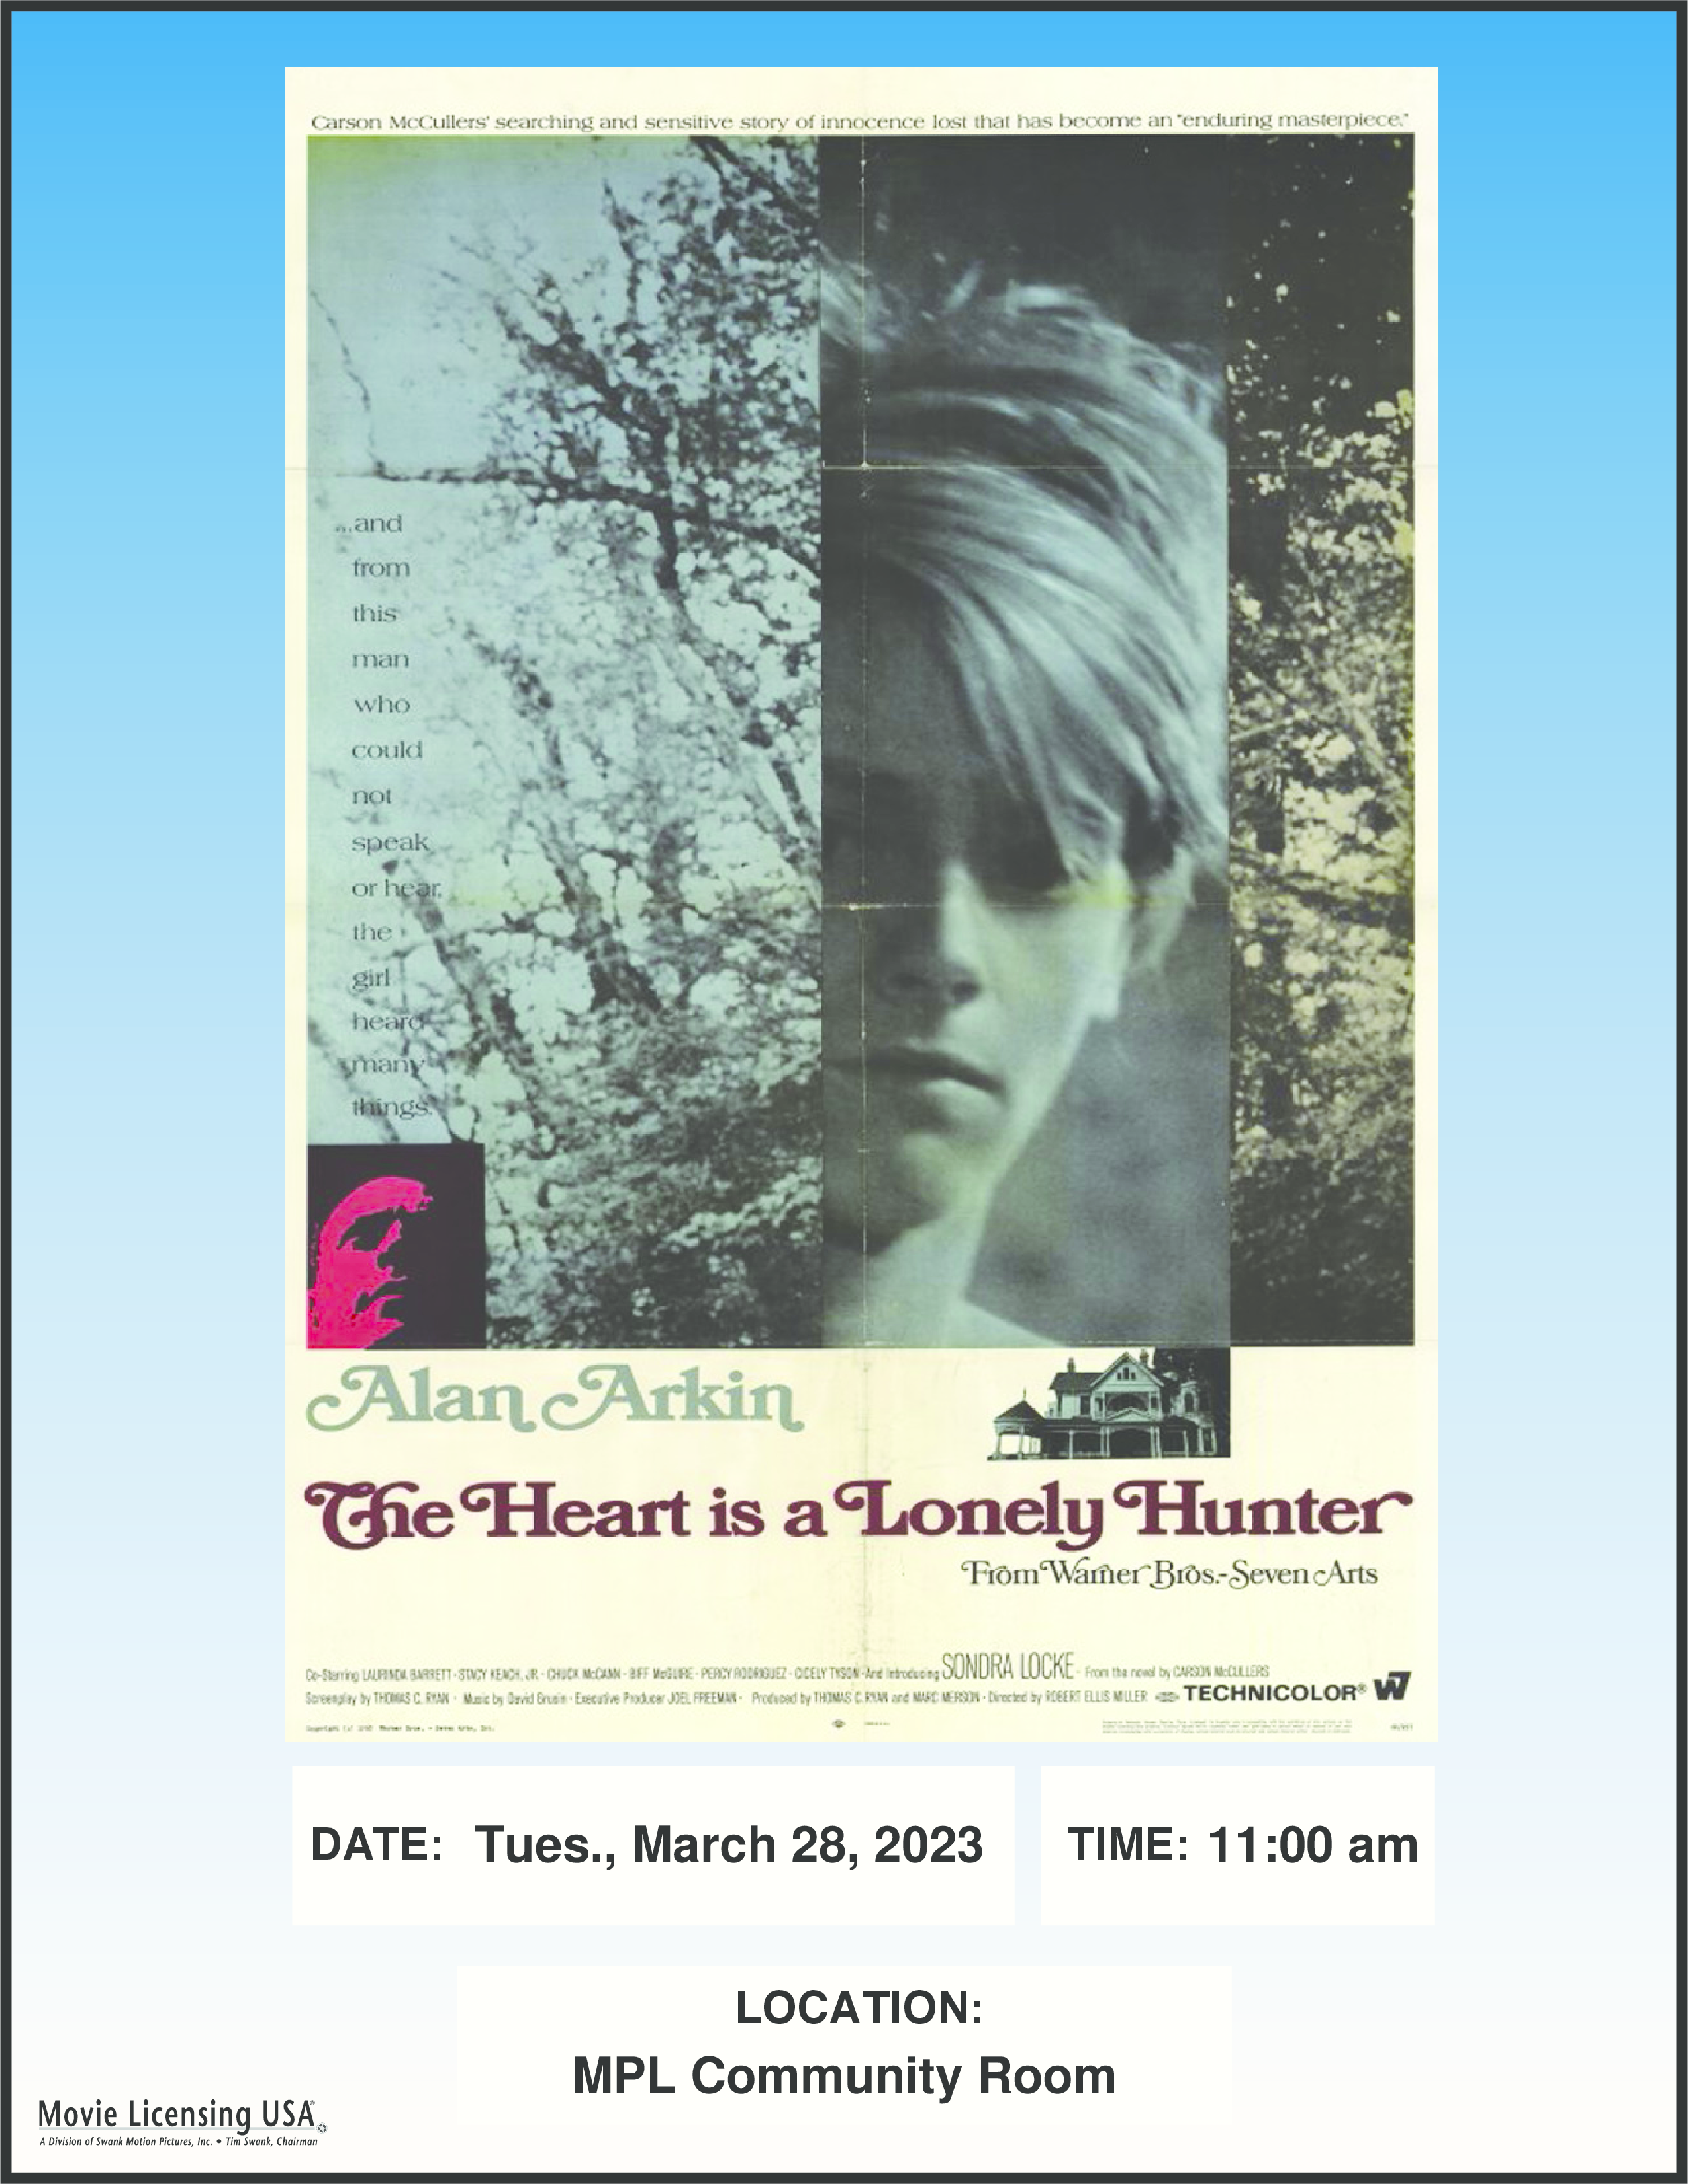 3/28 @ 11am free showing in the Community Room of The Heart Is a Lonely Hunter